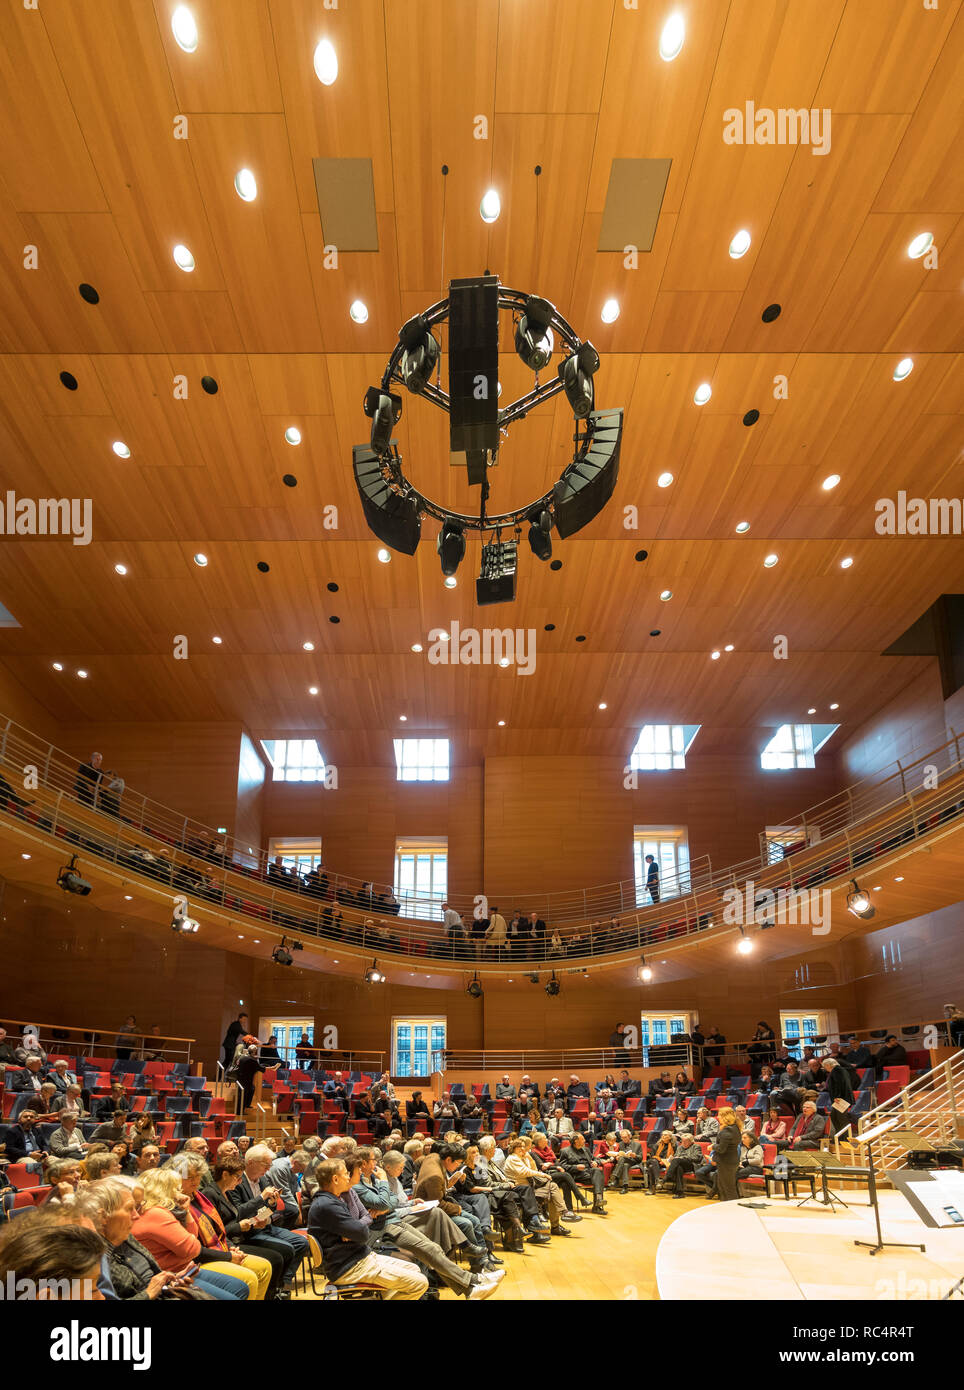 Pierre Boulez Saal in the Barenboim Said Academy Berlin. Designed by Gehry. Stock Photo